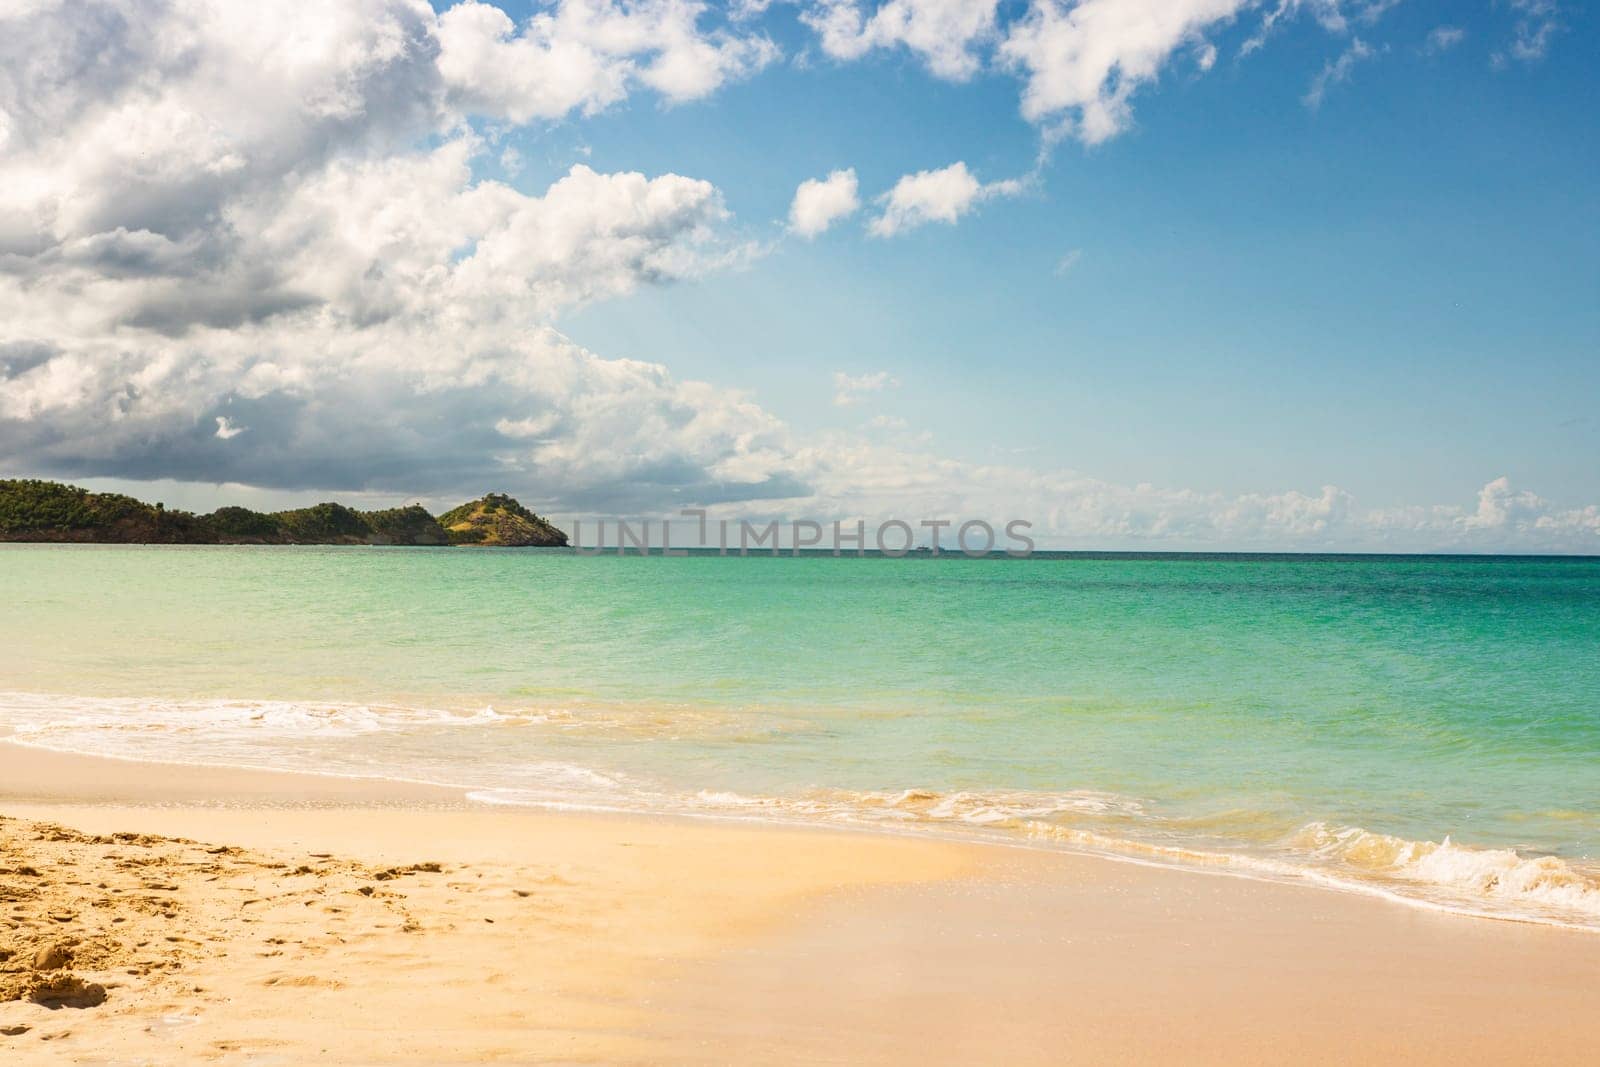 Caribbean beach with white sand, deep blue sky and turquoise water